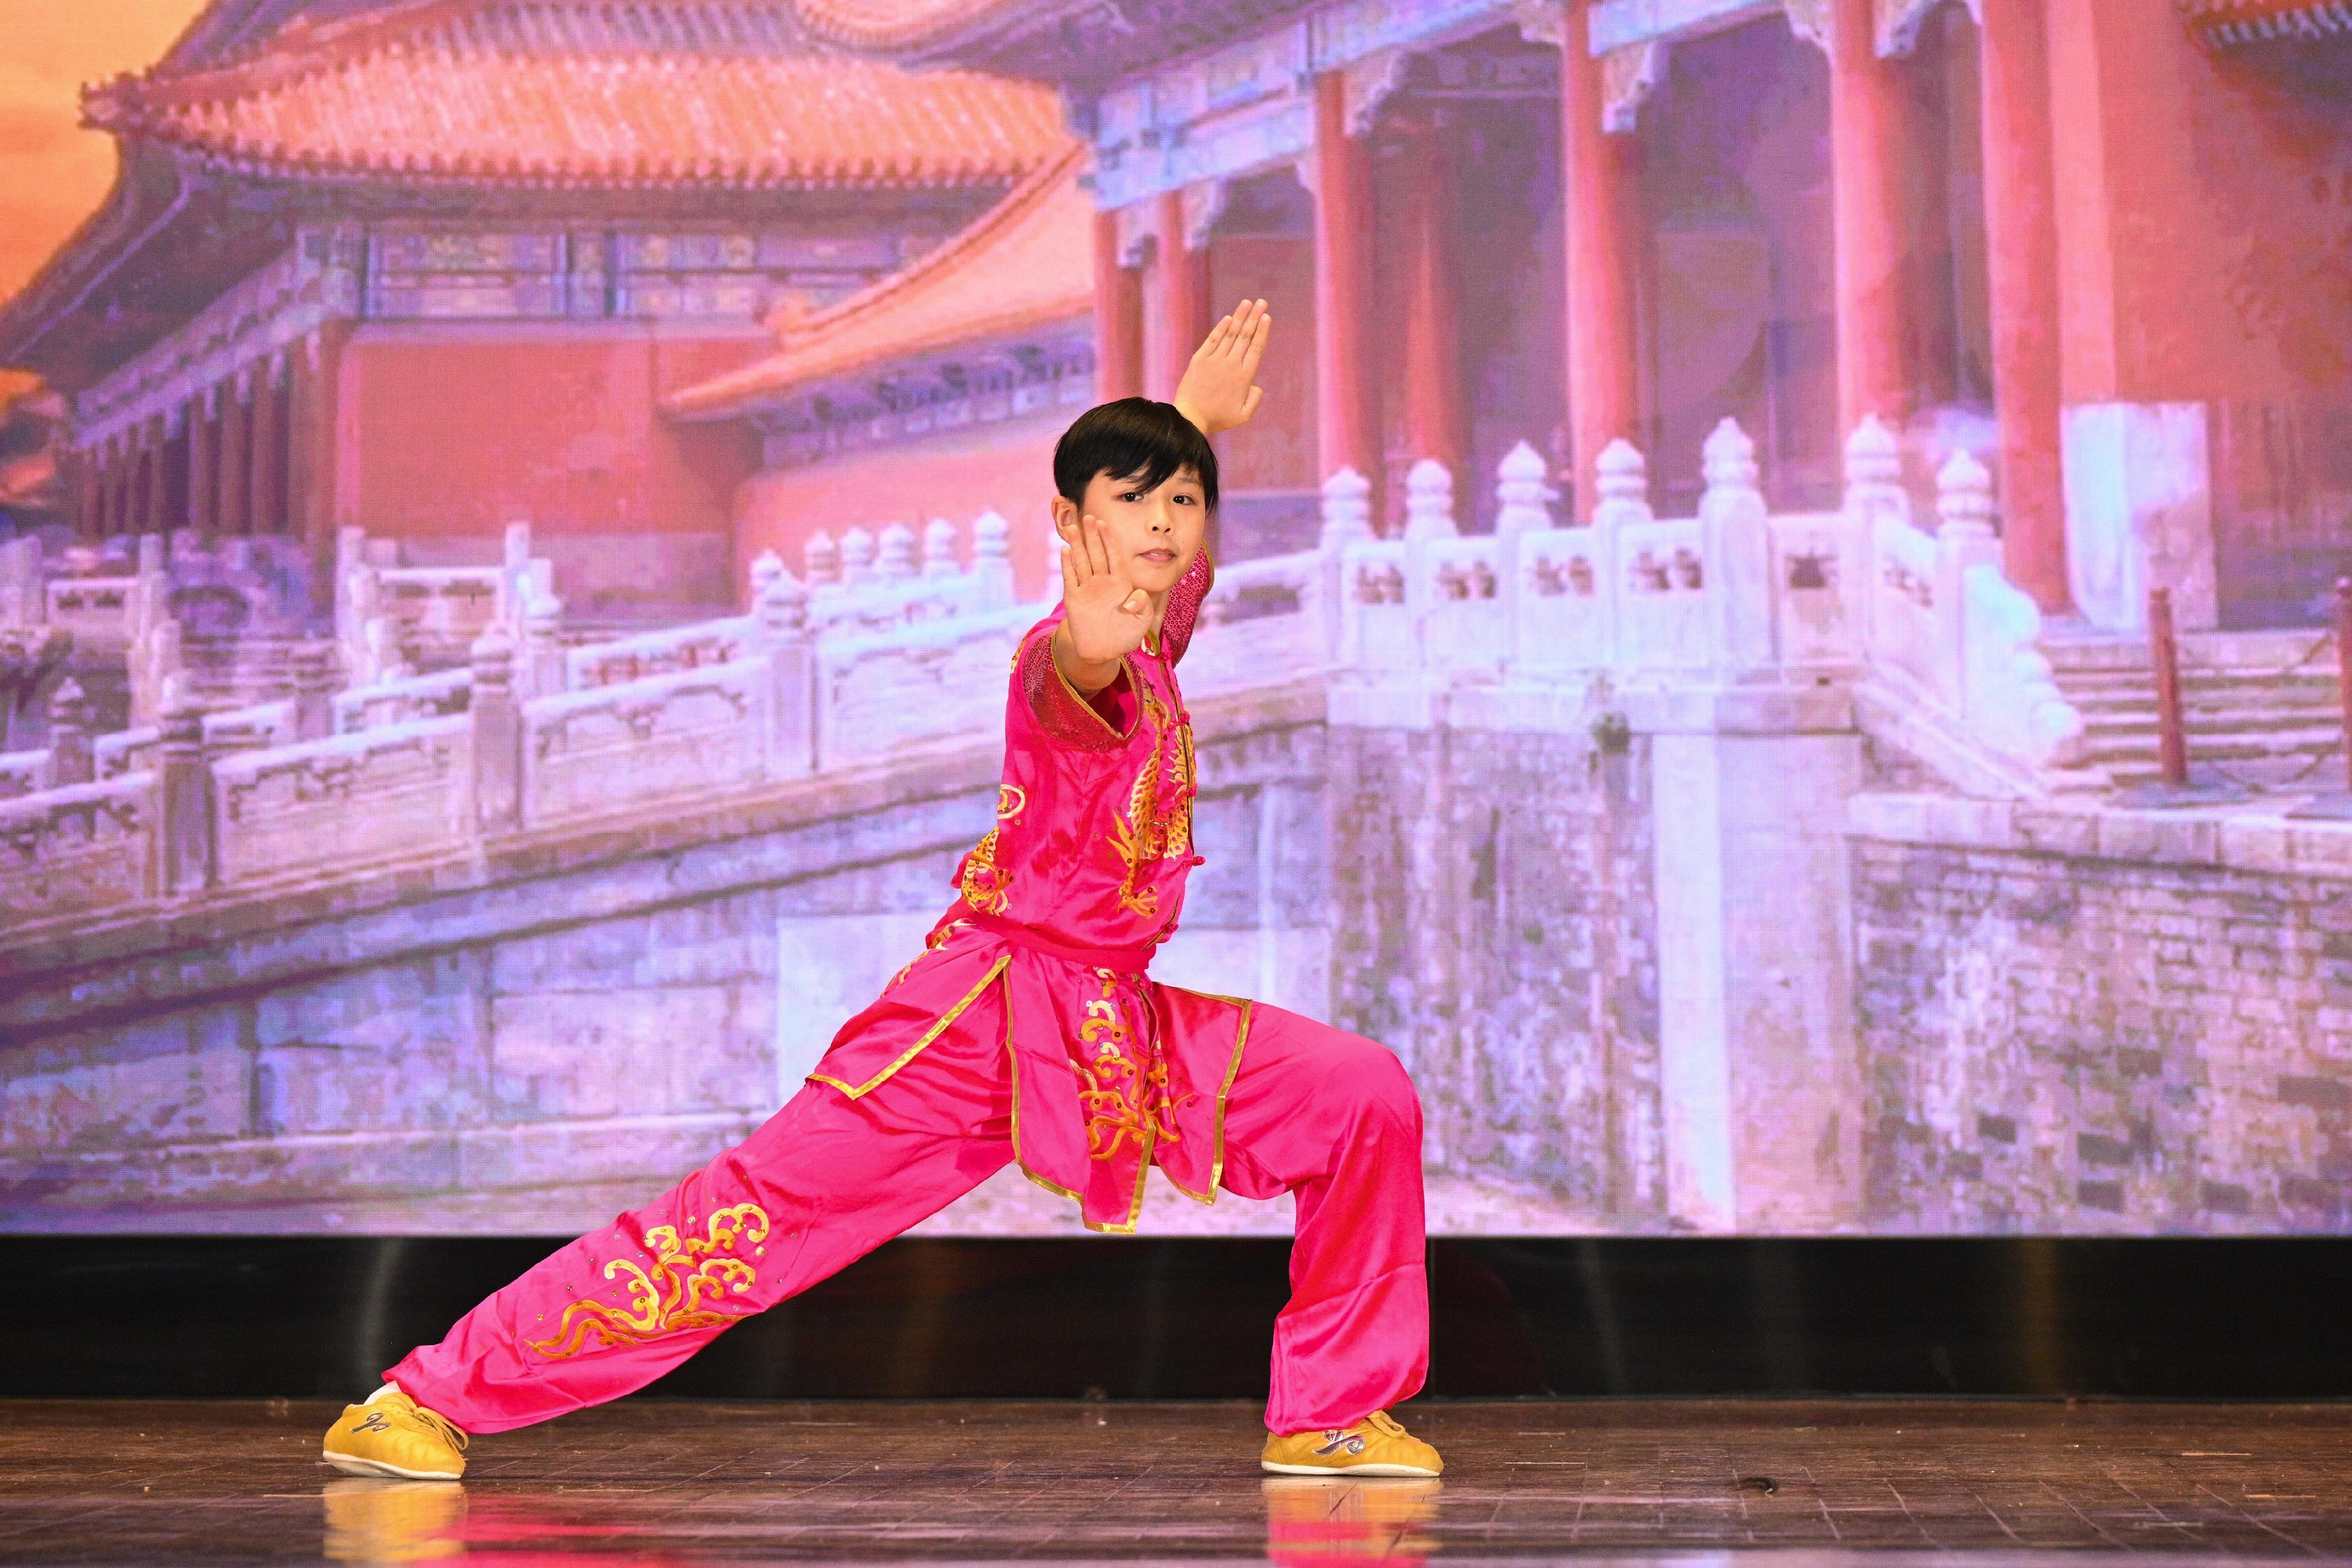 The Education Bureau today (June 30) held the "Love Our Home, Treasure Our Country" Celebration of 26th Anniversary of Hong Kong's Return to the Motherland cum Government Schools Joint School Activities Gala. Photo shows a student performing martial arts.